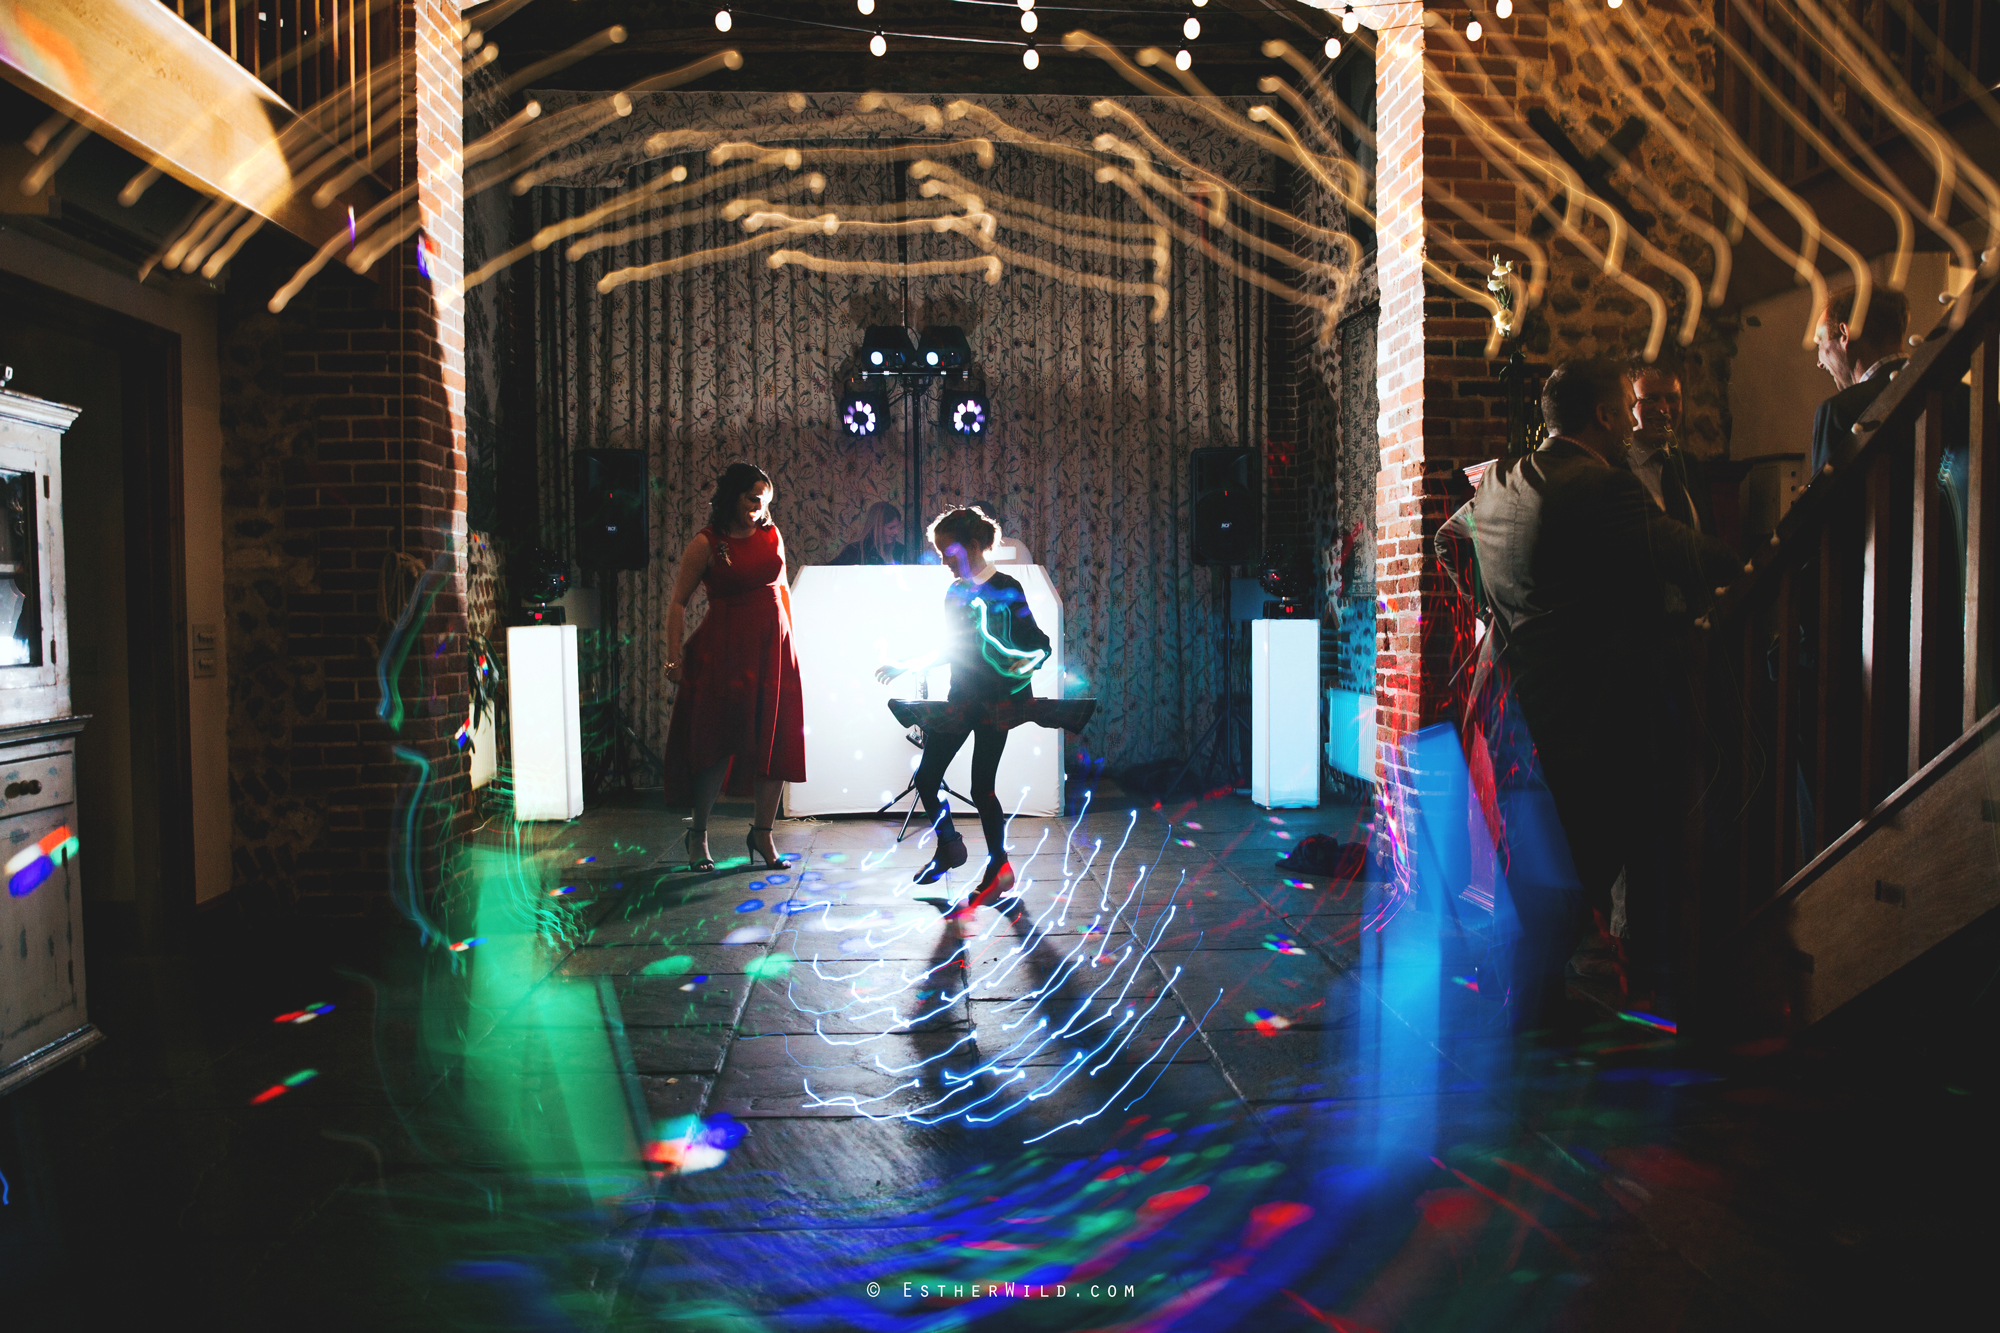 Wedding_Photographer_Chaucer_Barn_Holt_Norfolk_Country_Rustic_Venue_Copyright_Esther_Wild_IMG_2283.jpg